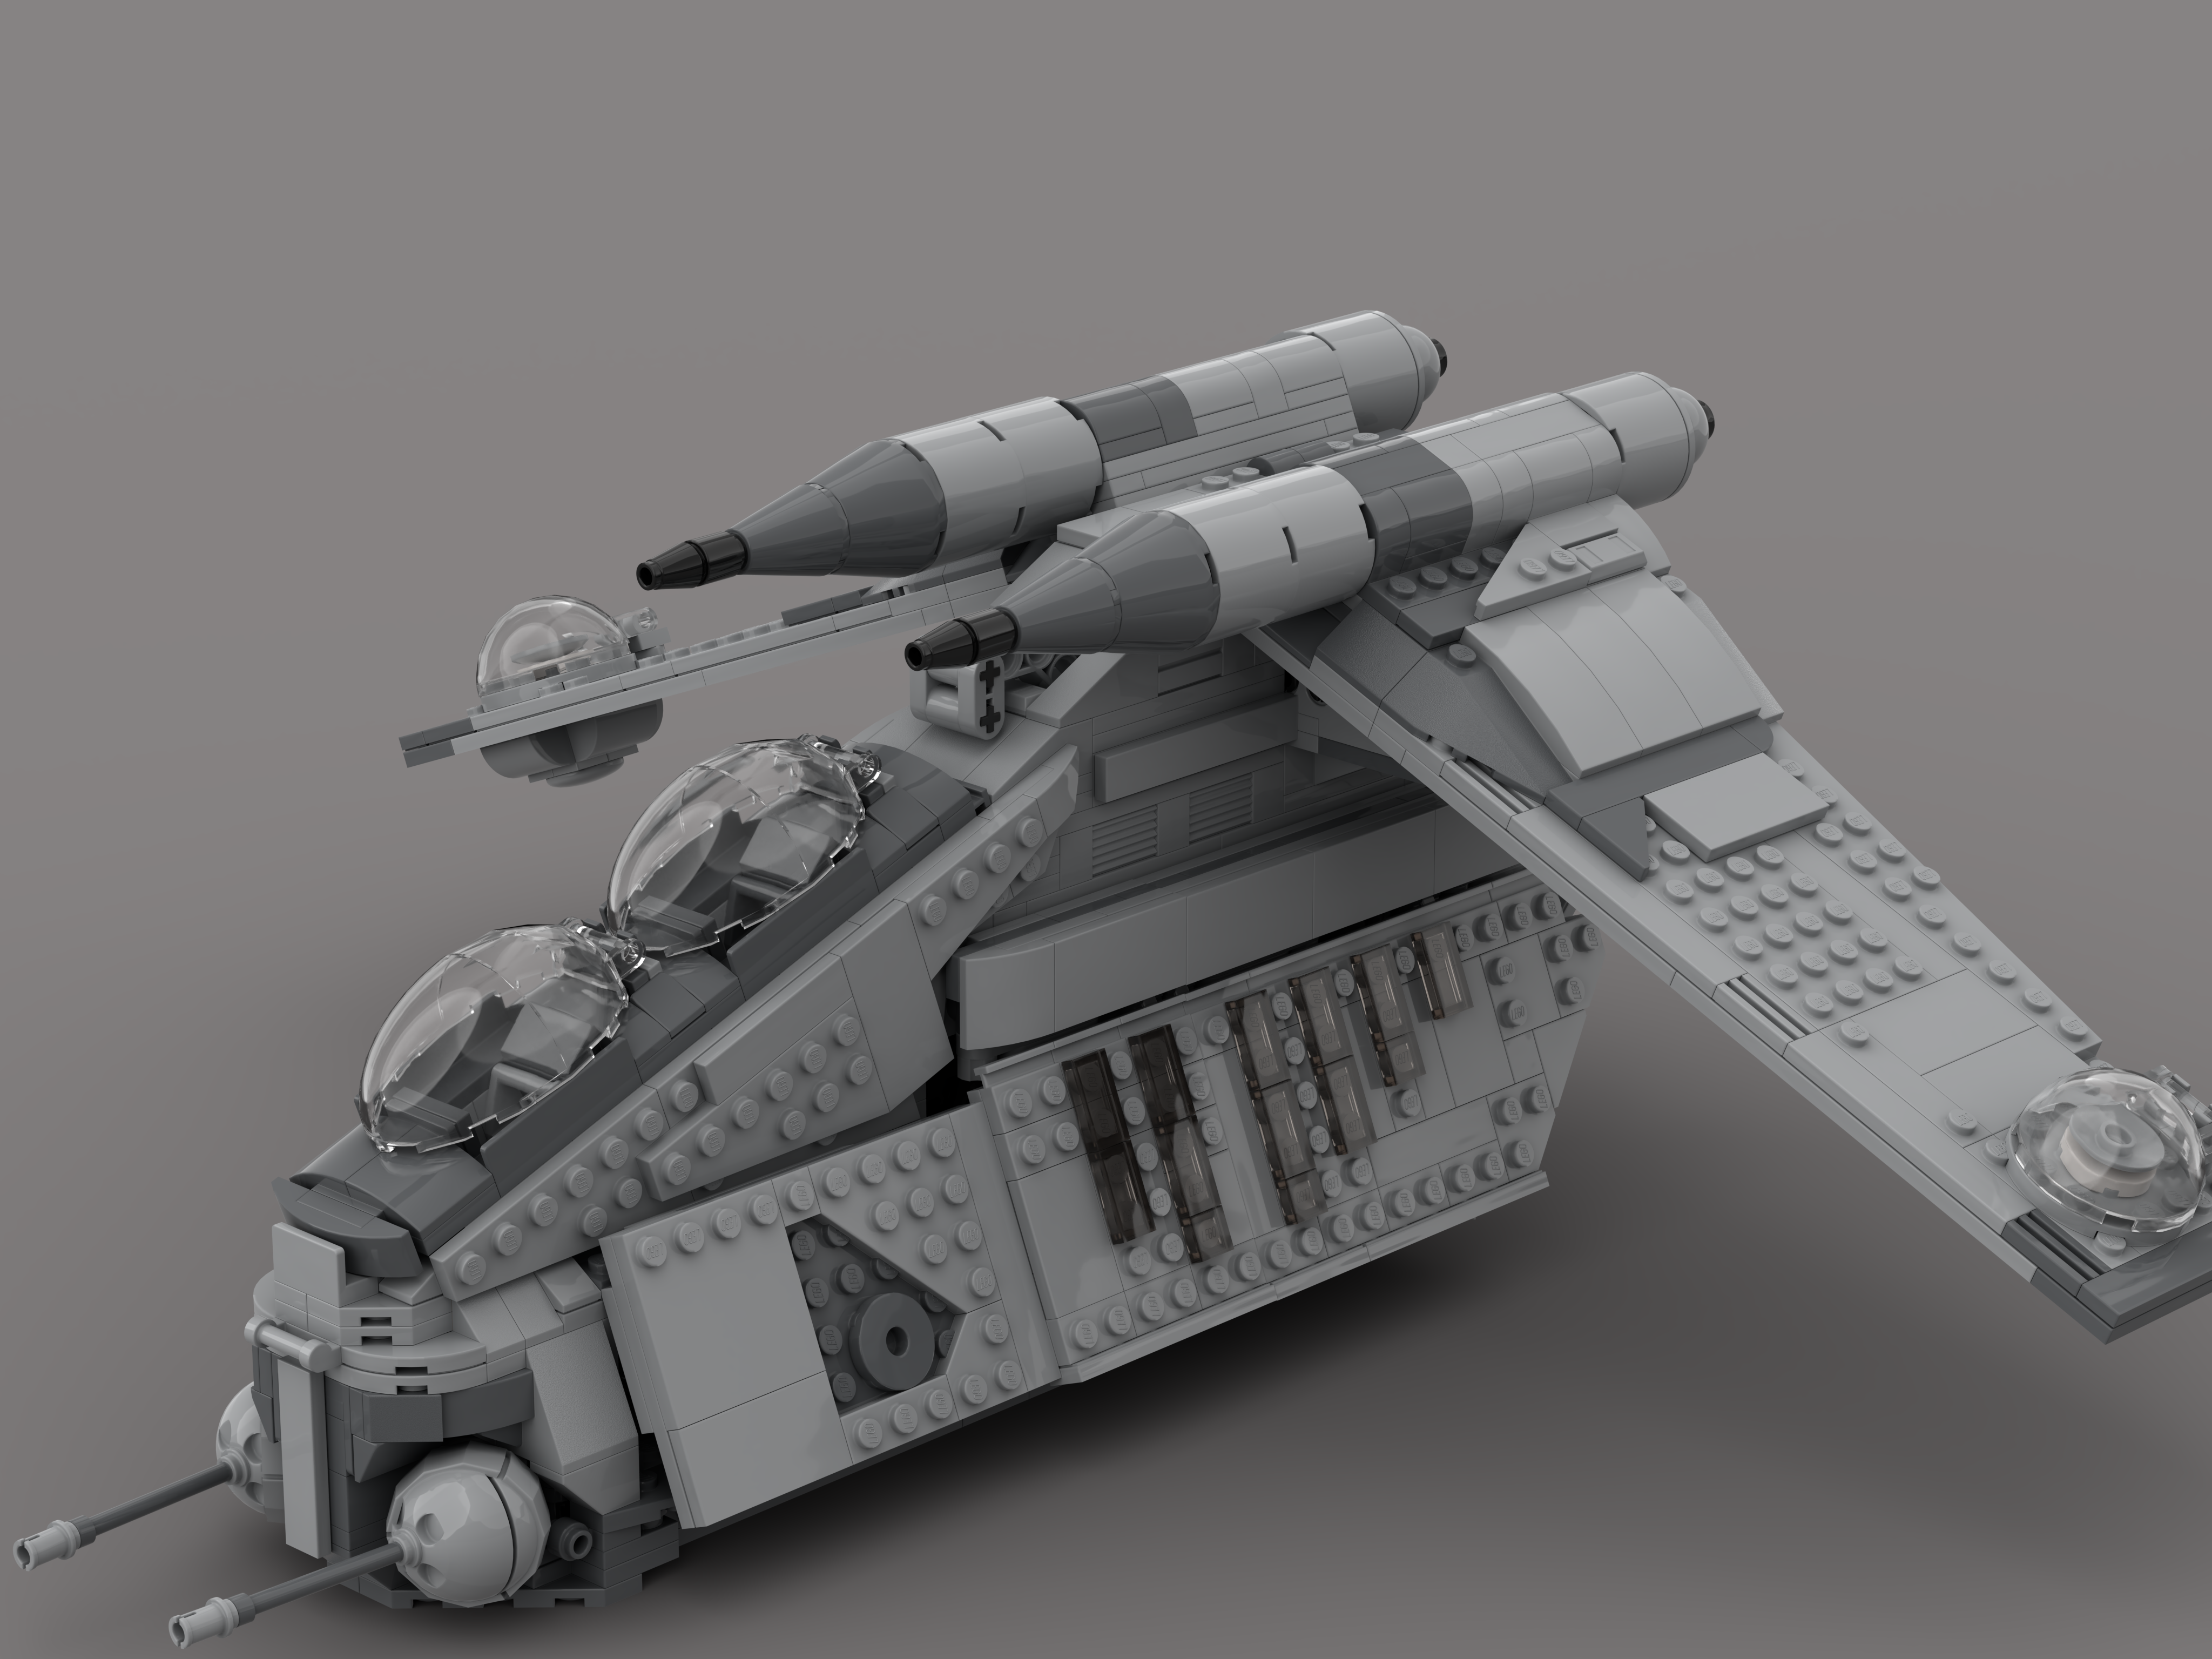 LIMITED EDITION IMPERIAL GUNSHIP